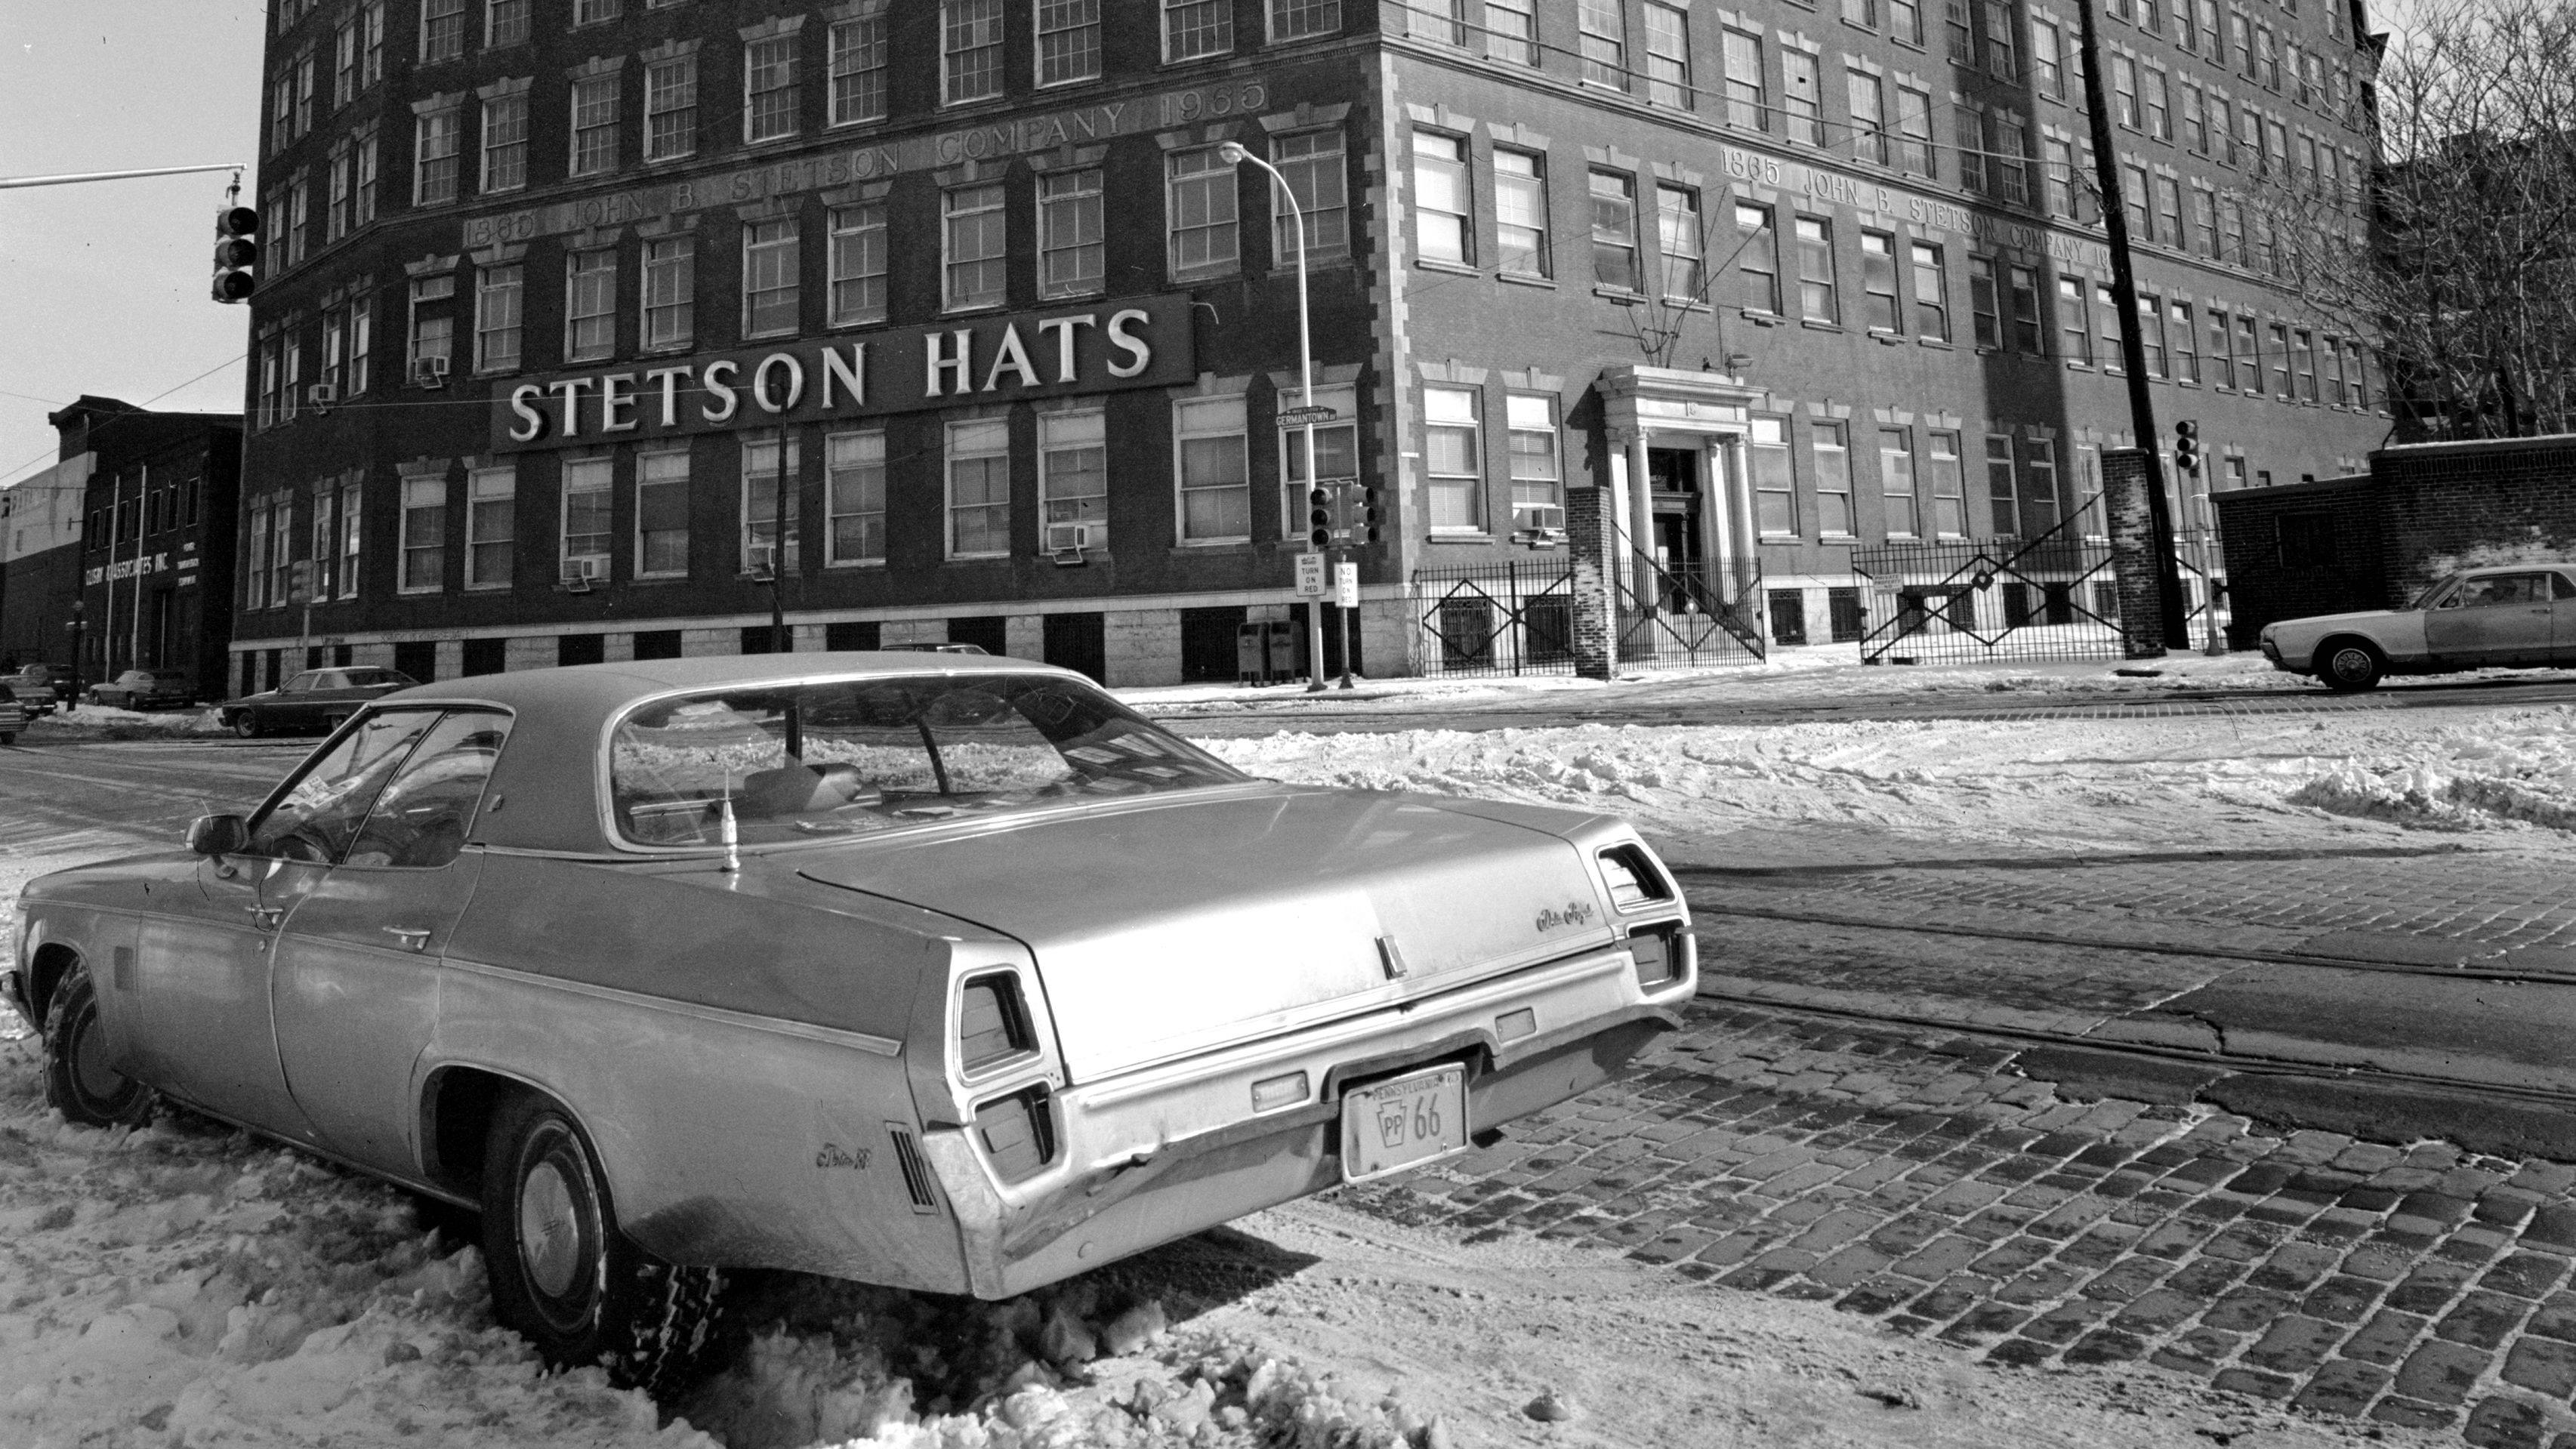 In a black-and-white photo, an eight-story warehouse with many windows and a sign that reads “Stetson Hats” stands on a snowy street. Across the street in the foreground, an older-model car is parked in the snow.